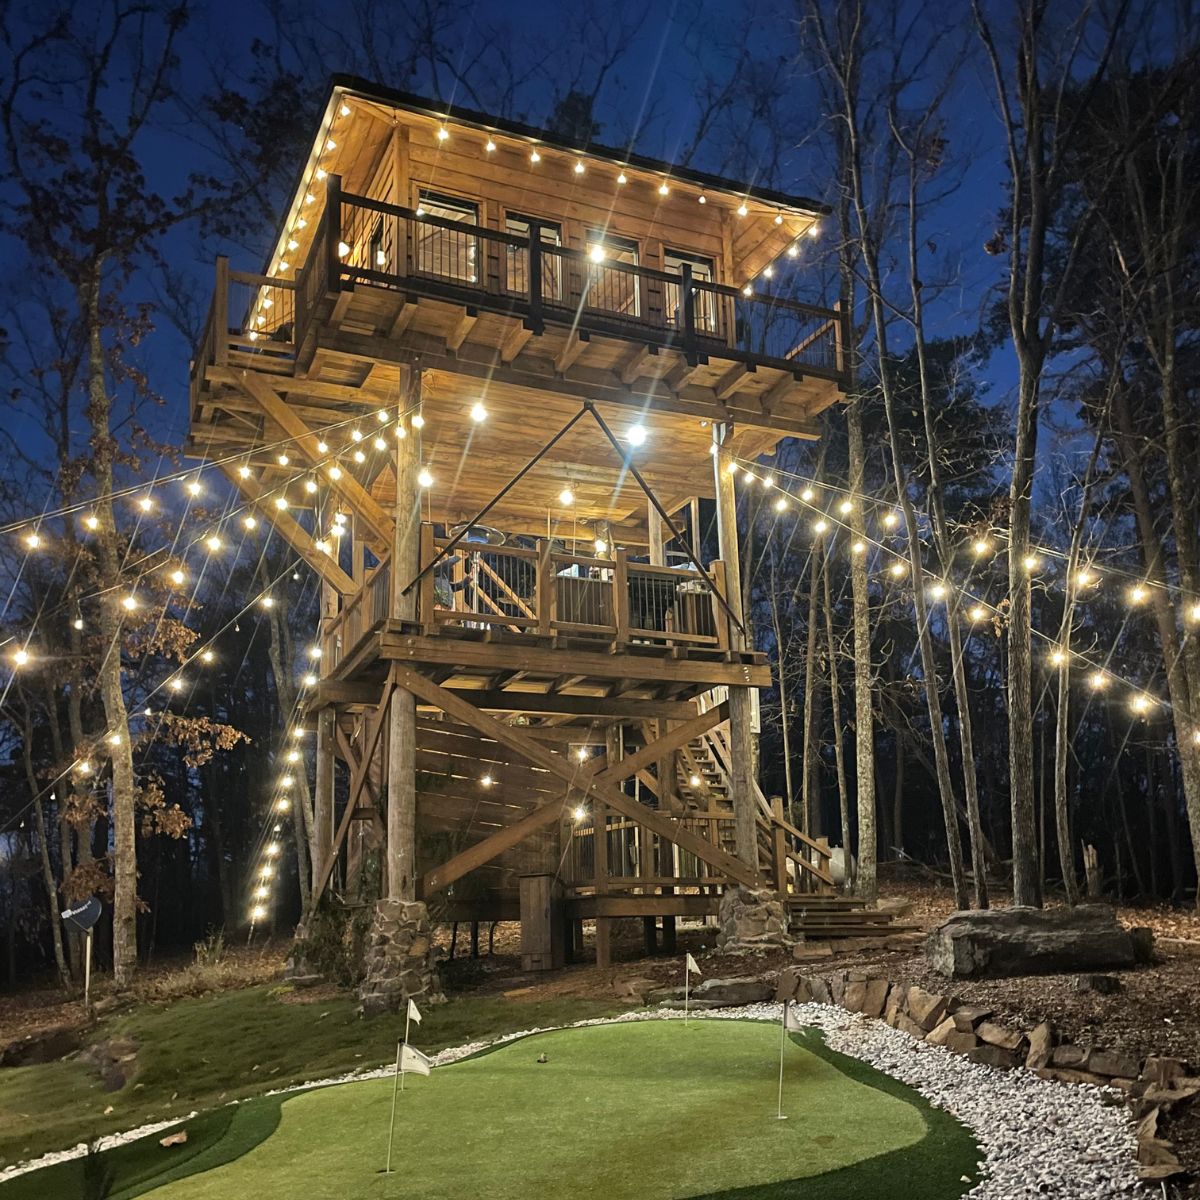 Night View of Epic Lookout Tower lit up